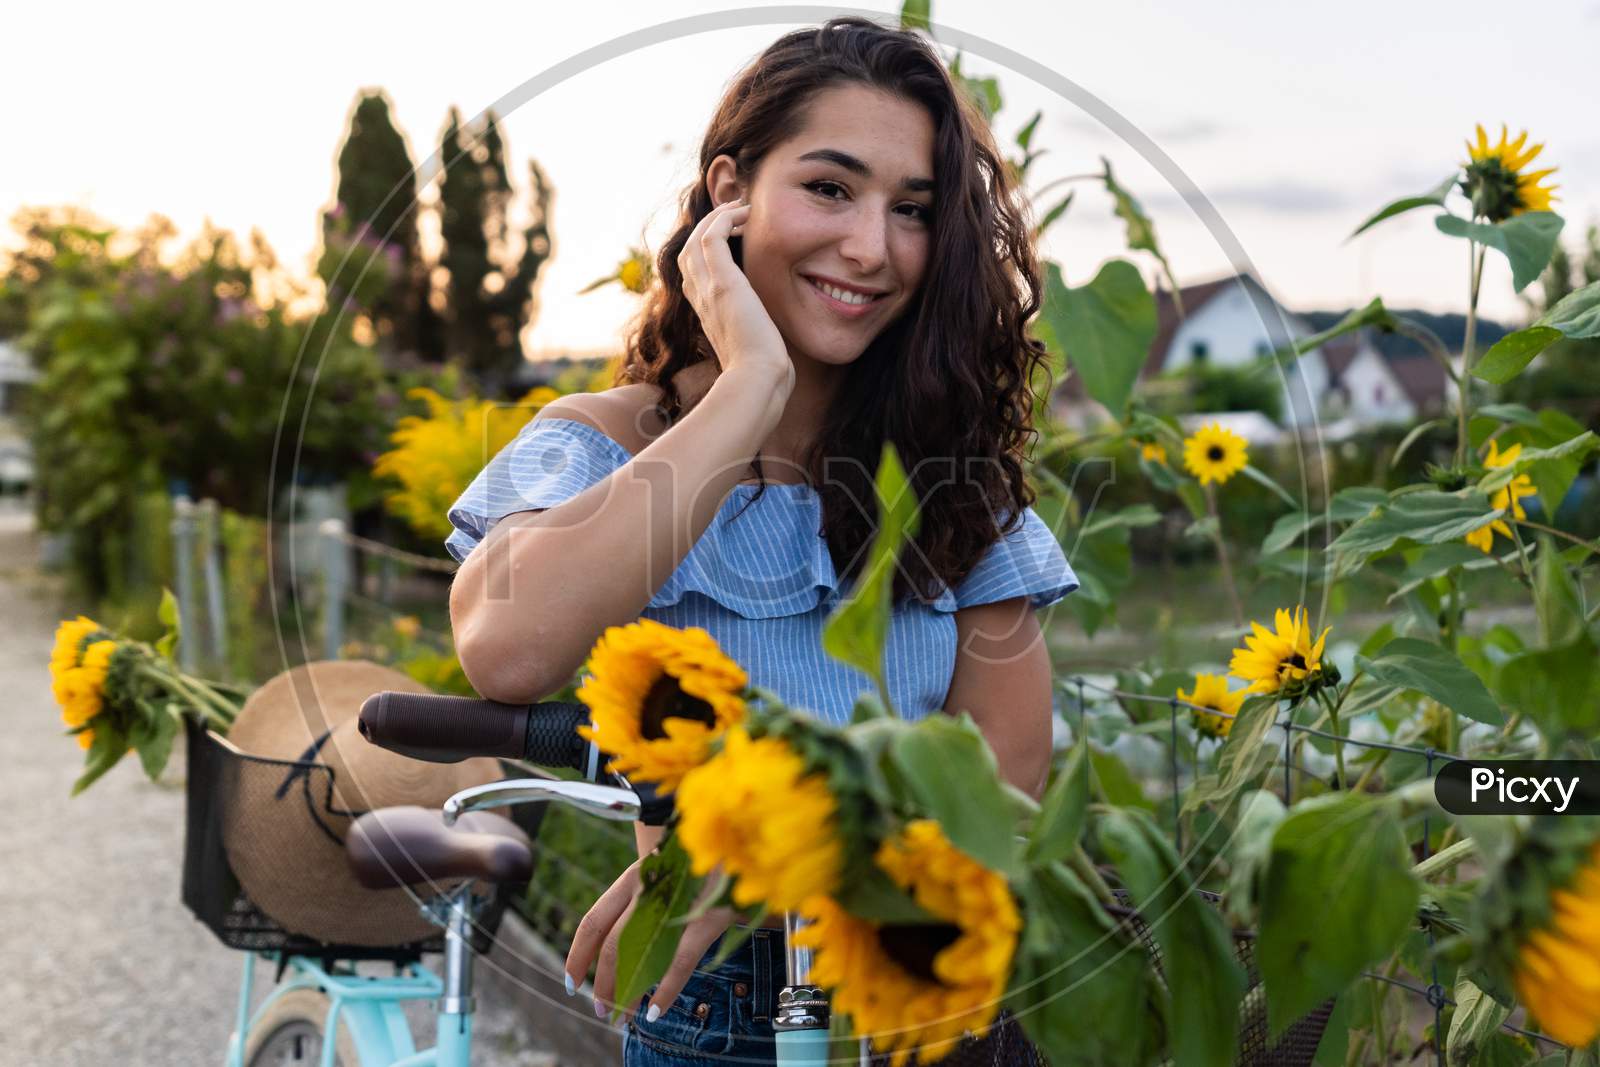 Beautiful Young Lady Walking Through An Allotment While Pushing Her Turquoise Bicycle With Sunflowers In A Basket.